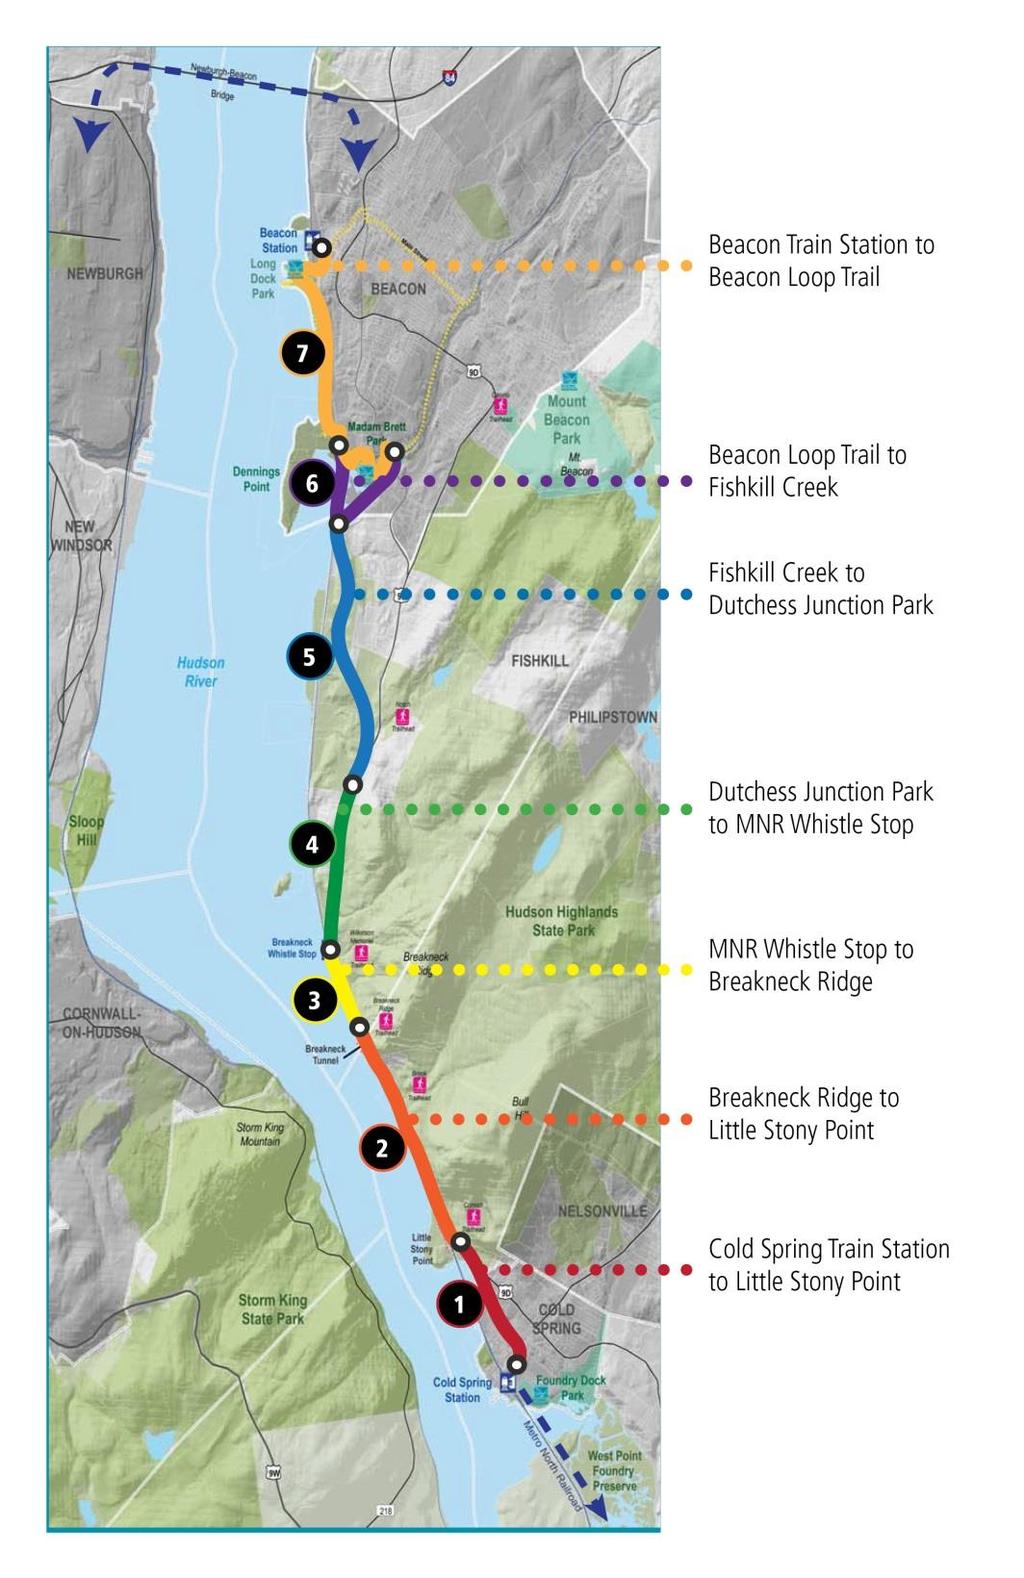 Preferred Trail Alignment Seven Segments 1. Cold Spring Station to Little Stony Point 2. Little Stony Point to Breakneck Ridge 3.